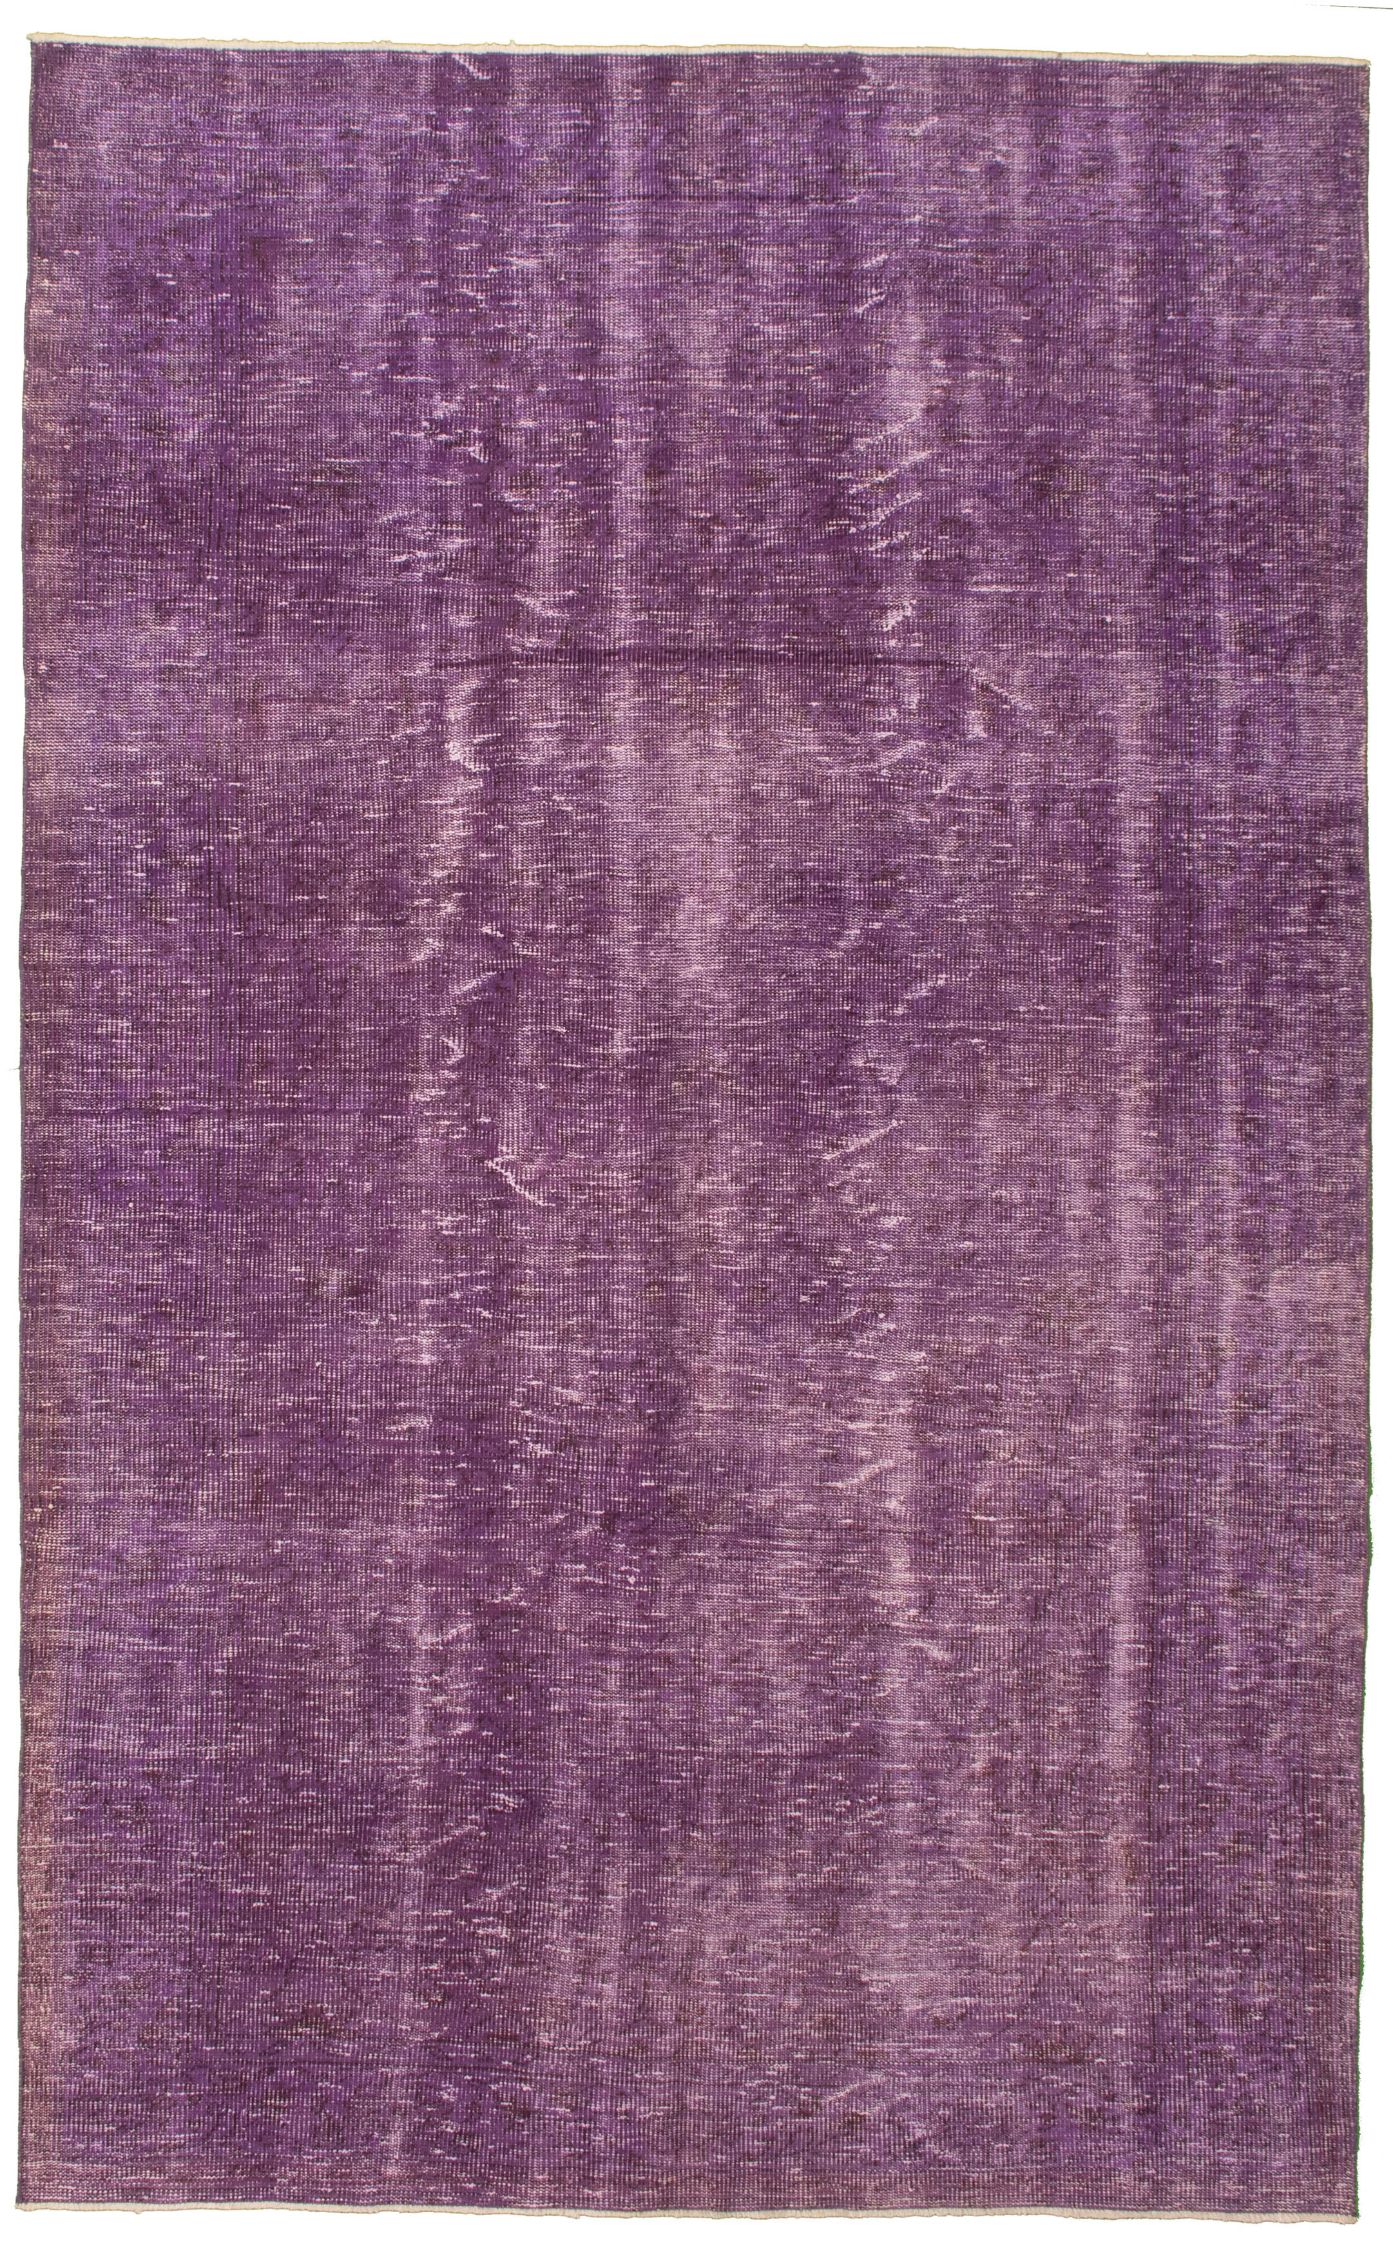 Hand-knotted Color Transition Indigo Wool Rug 5'10" x 9'6" Size: 5'10" x 9'6"  